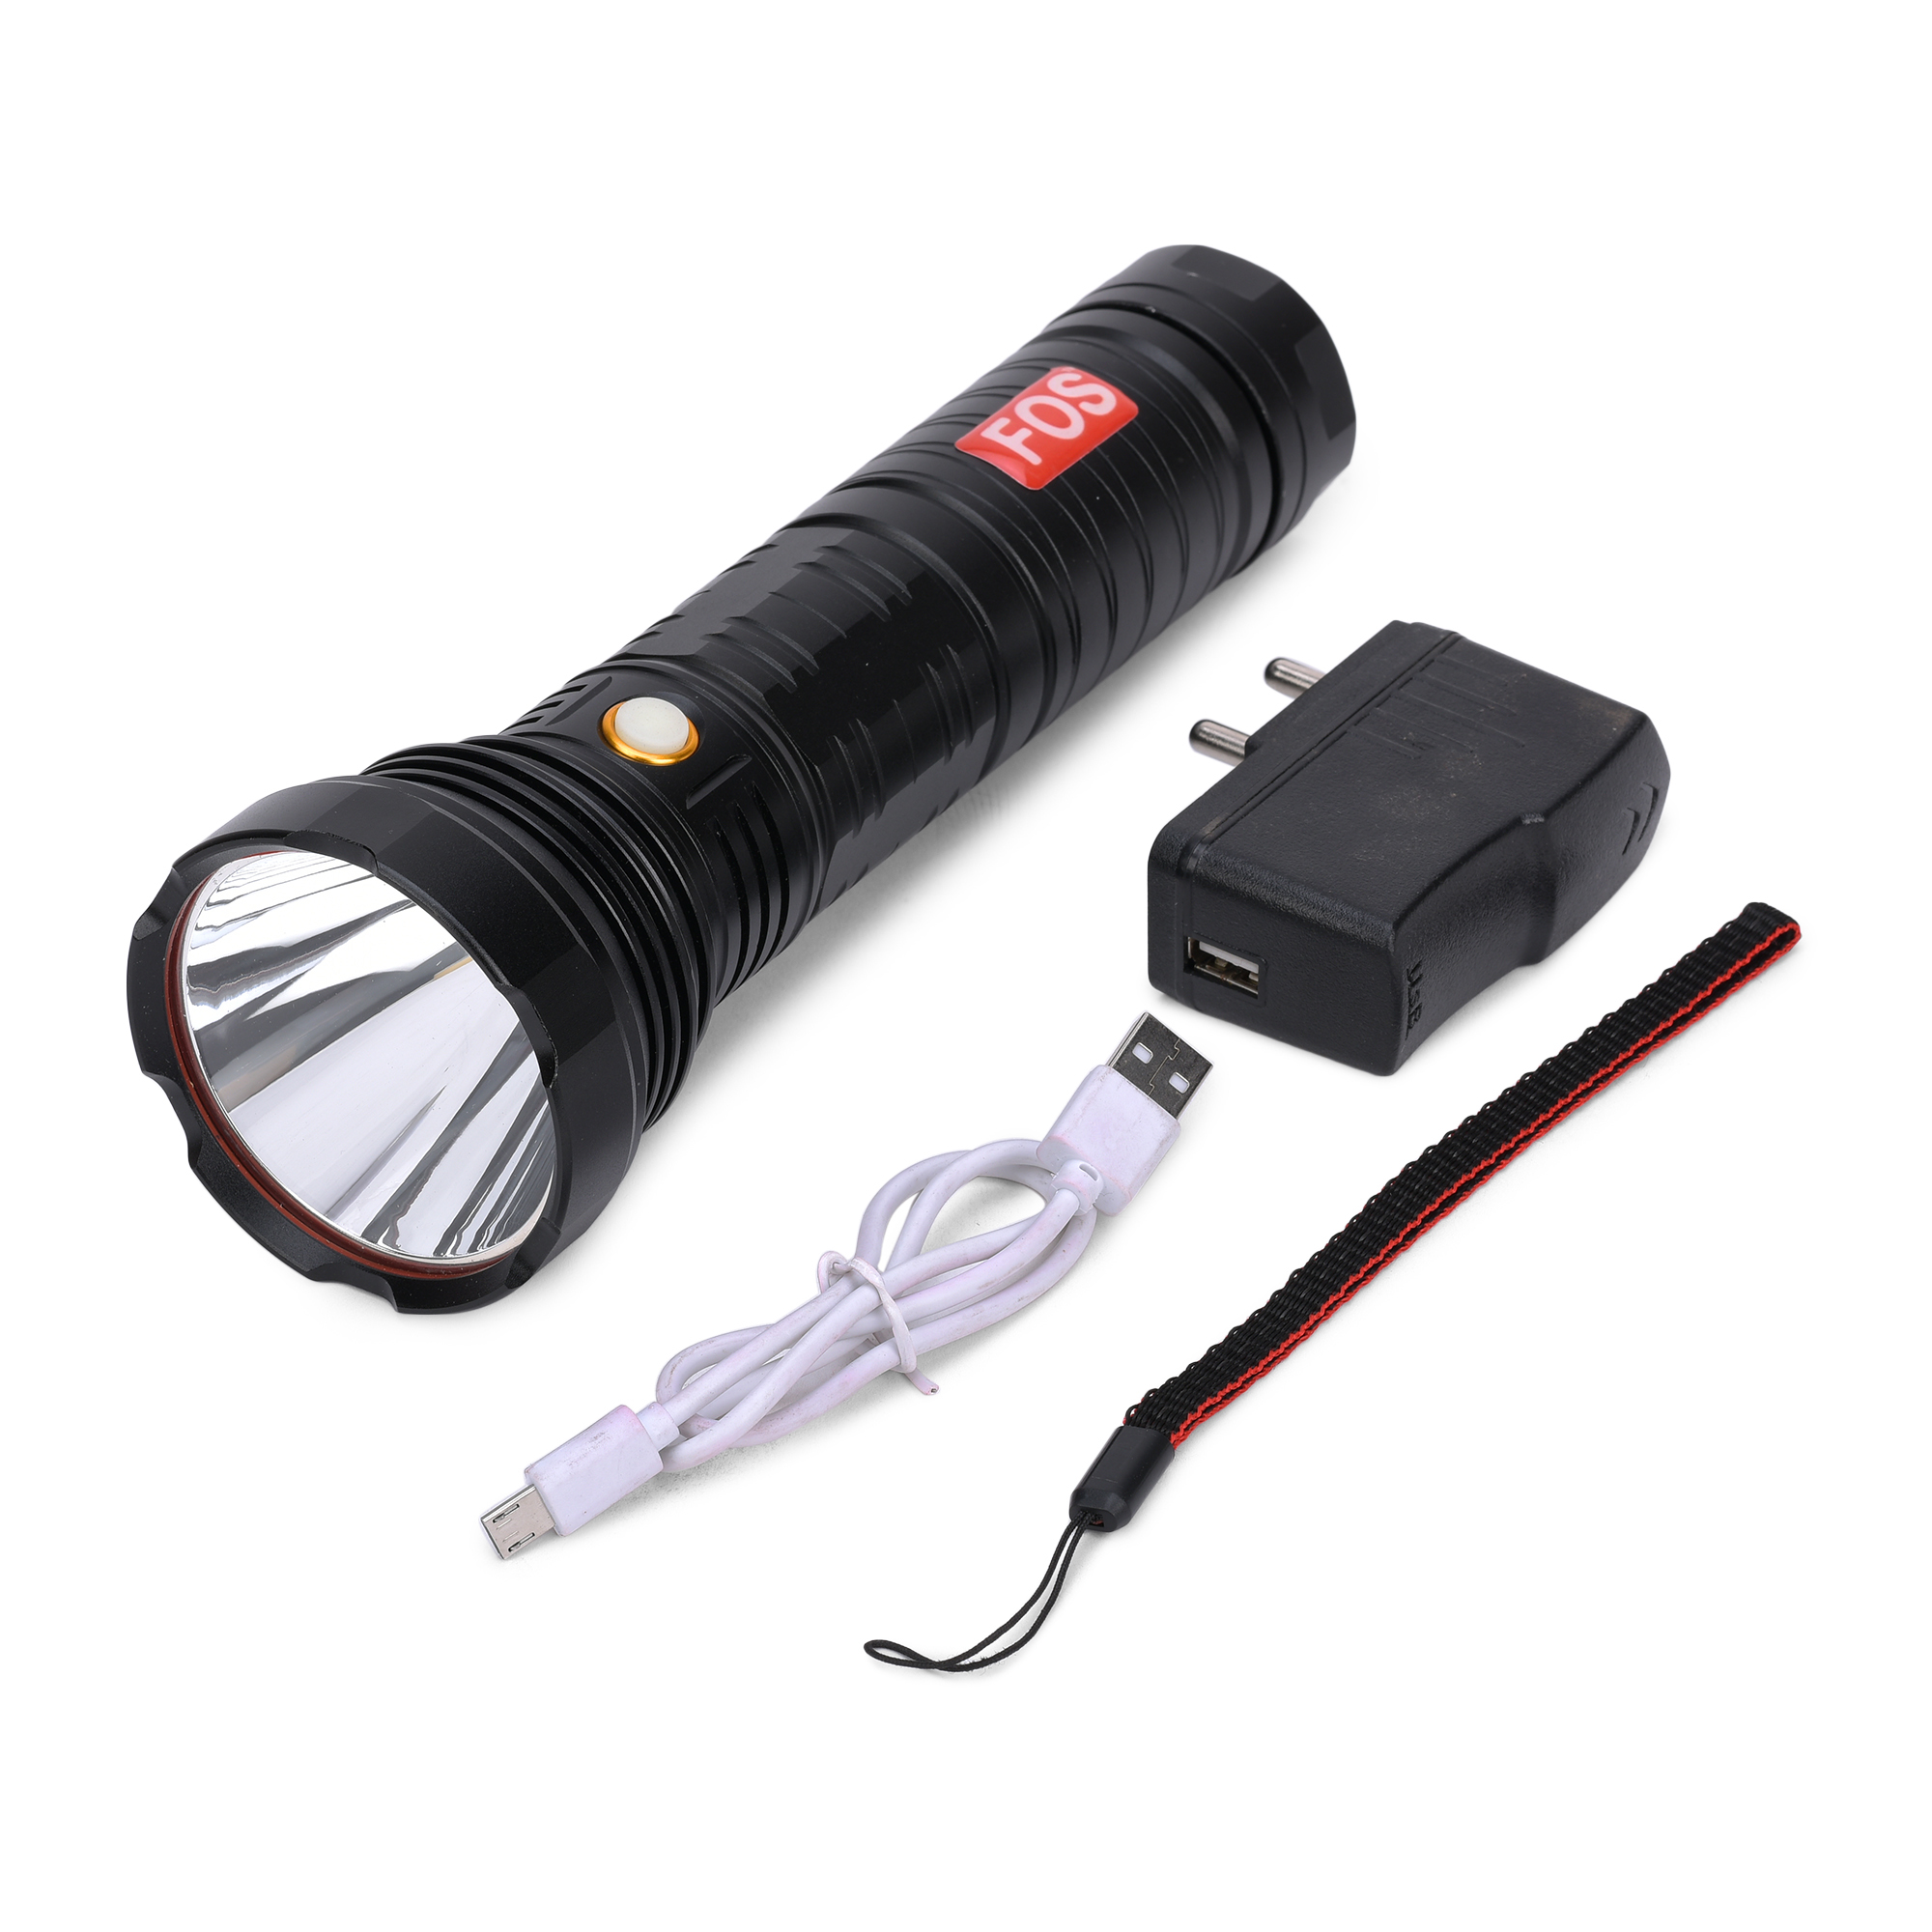 FOS LED Search Light 25W (Range 1.5 Km.) with 15 Ah Lithium-ion Battery